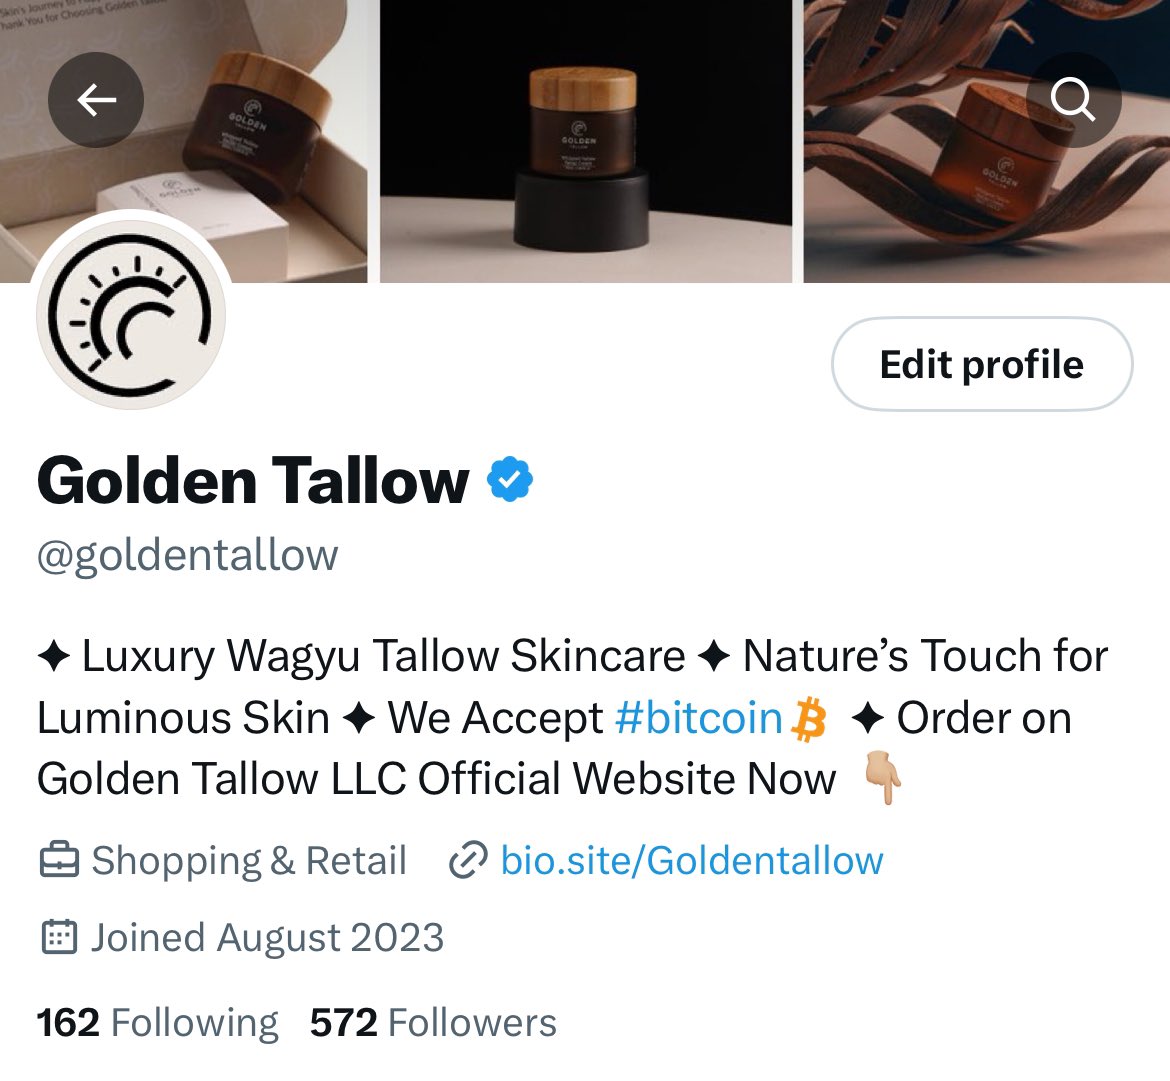 Exciting update! We've recently invested in Twitter premium to enhance our online presence. This is part of our ongoing commitment to reinvesting in our business to ensure we can continue delivering top-notch skincare products.✨ Thank you all for your continued support!🫶🏼🙏🏼